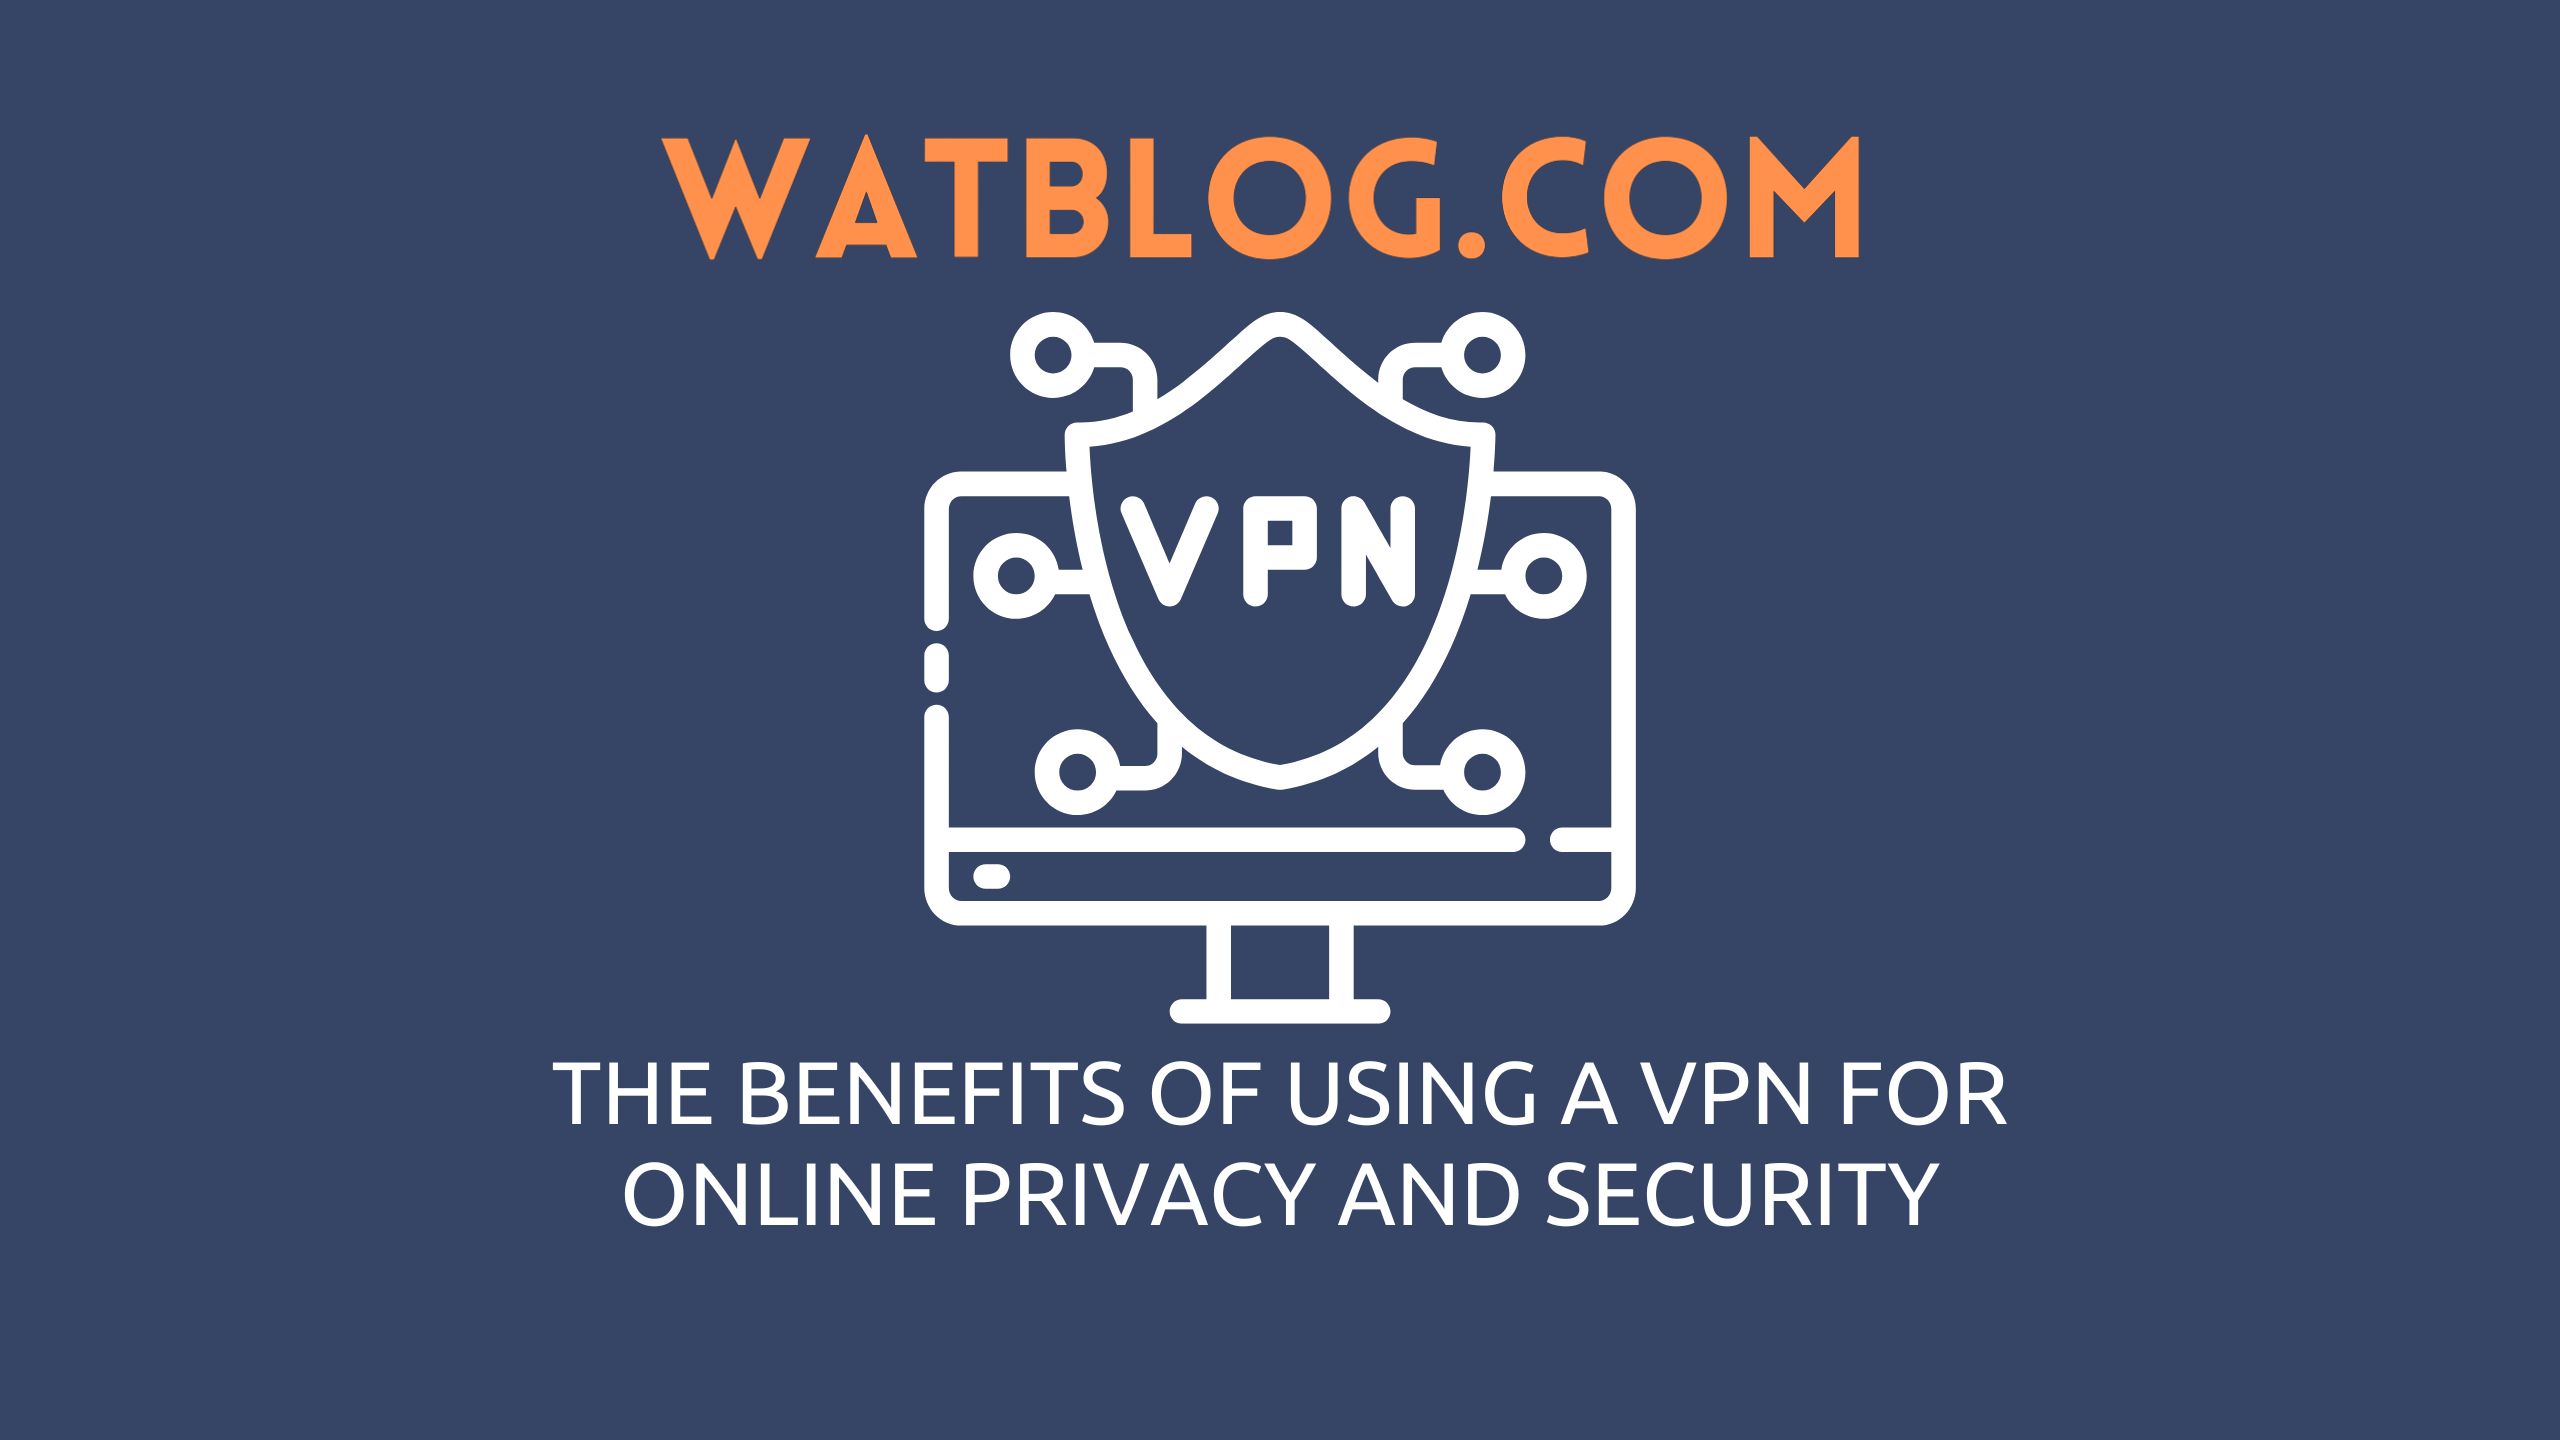 The Benefits of Using a VPN for Online Privacy and Security